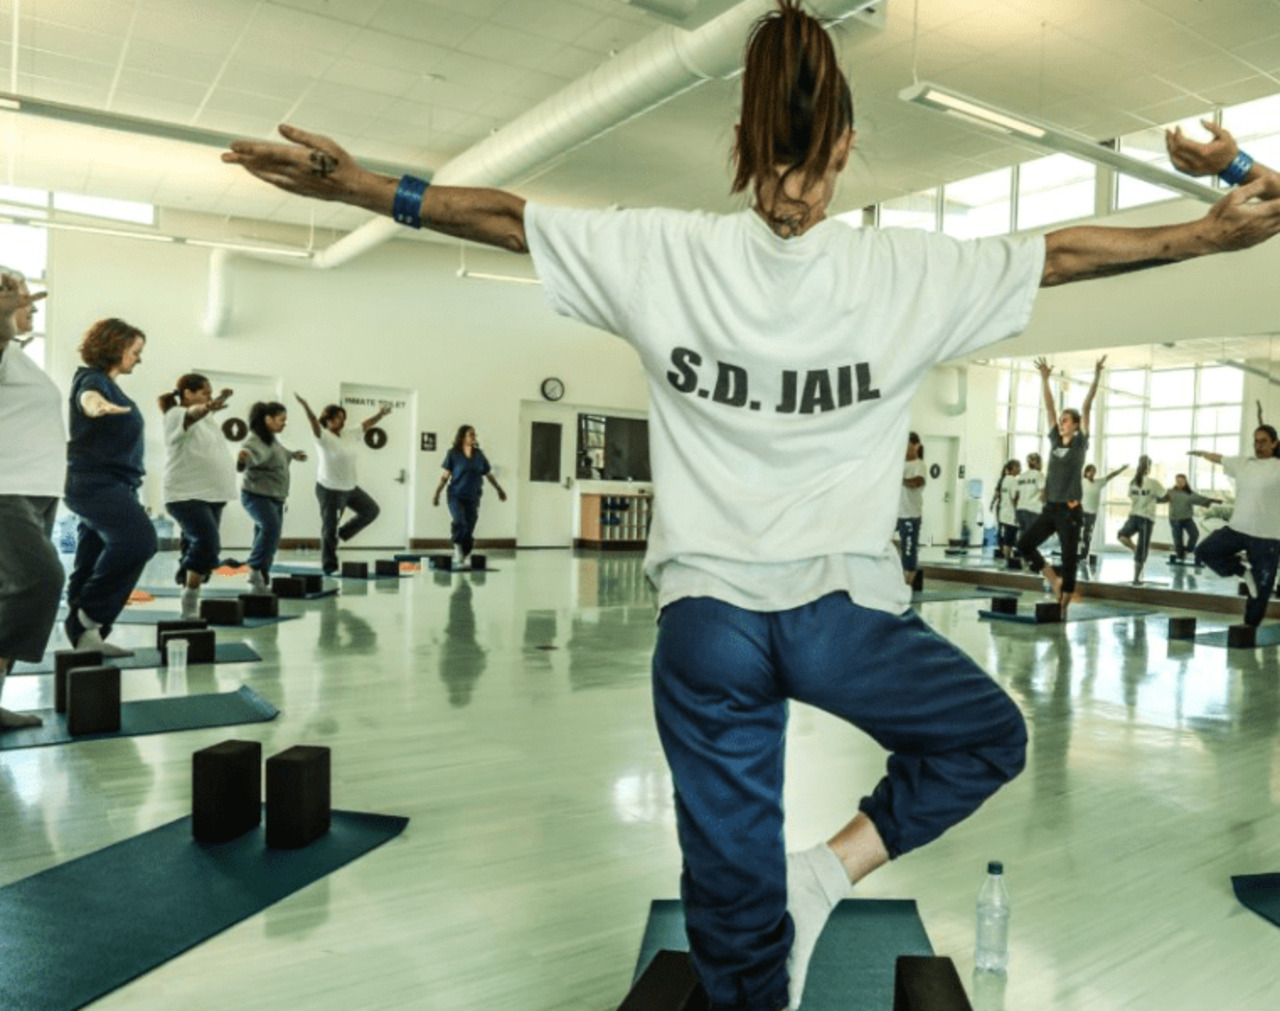 Inmates shackled through self-help? A talk on yoga in prison